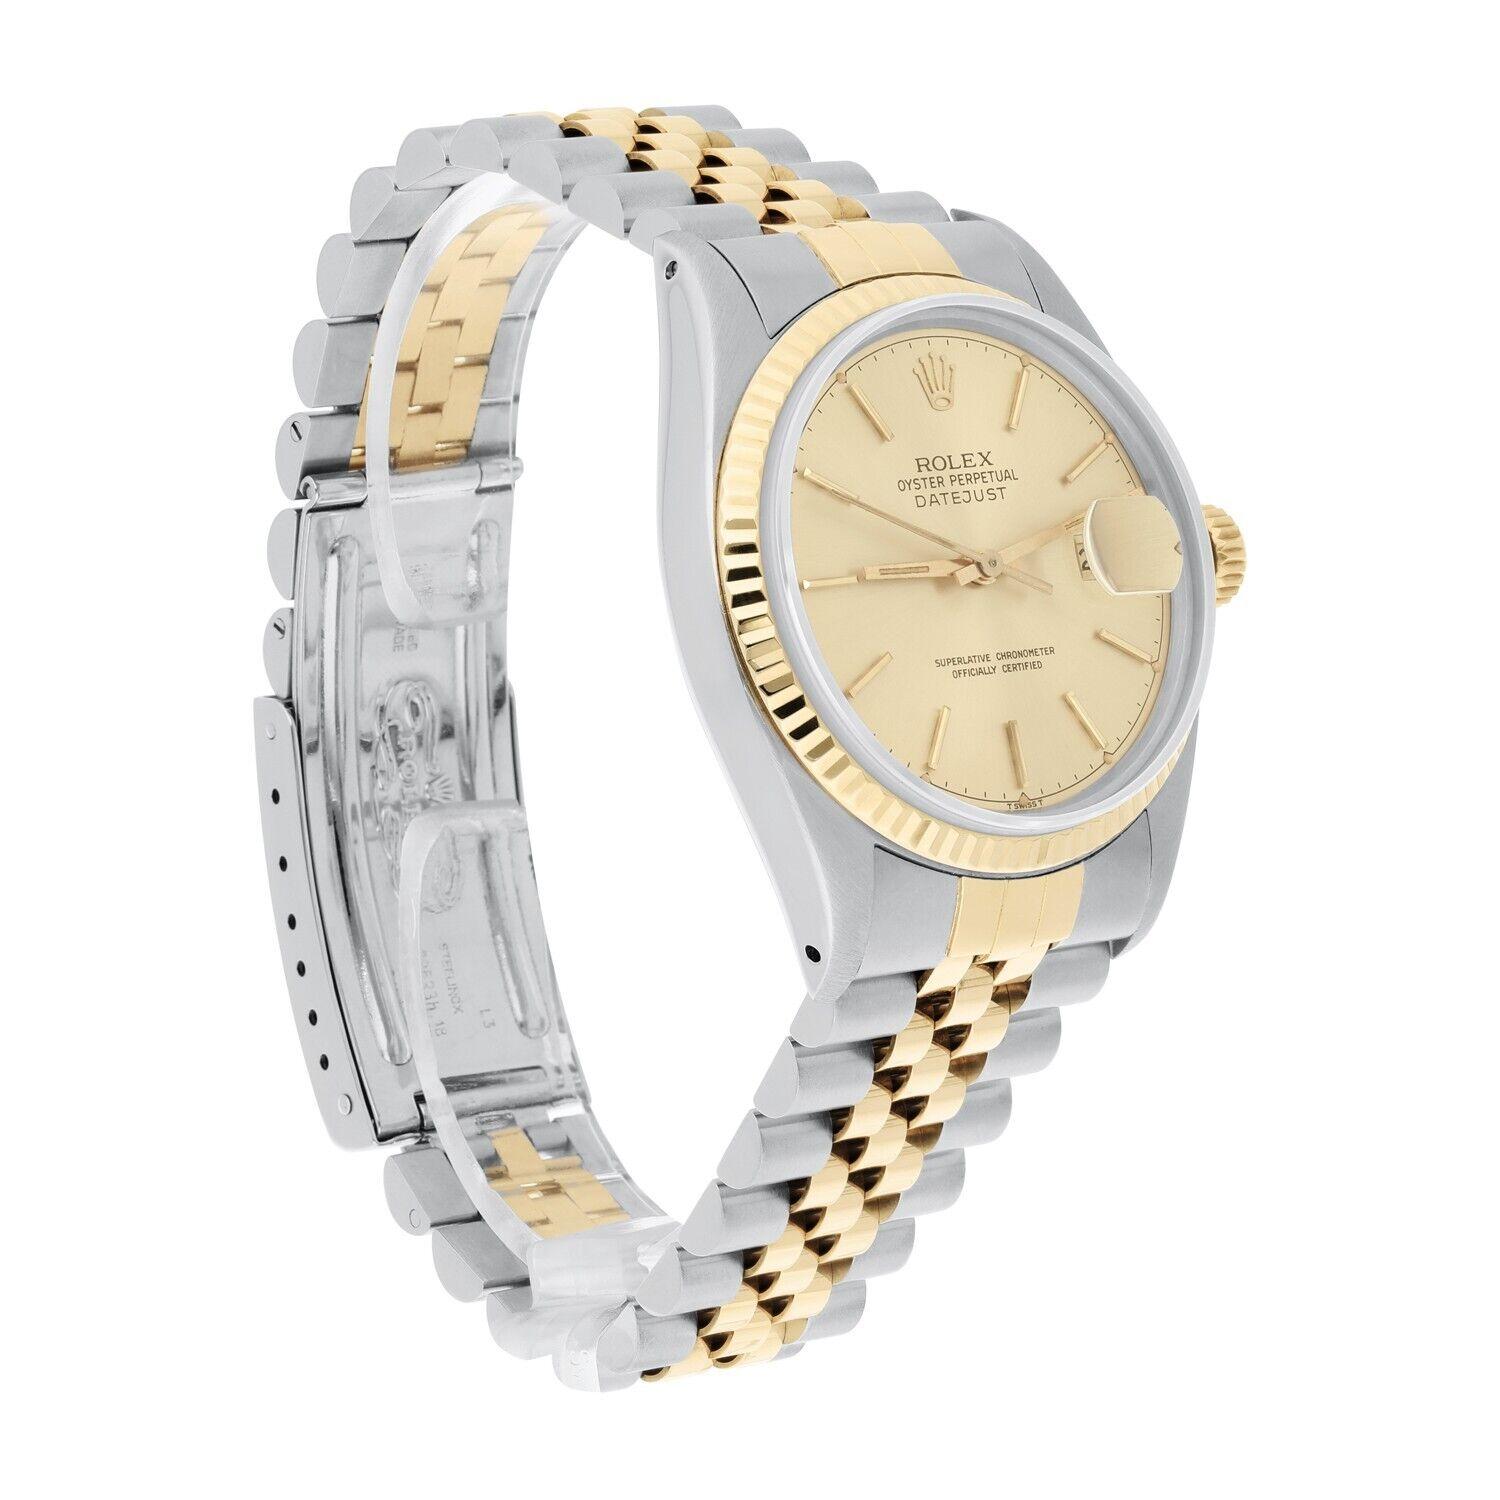 Rolex Datejust 36mm Two Tone Champagne Dial Jubilee Band 16013 Circa 1979 B/P For Sale 2